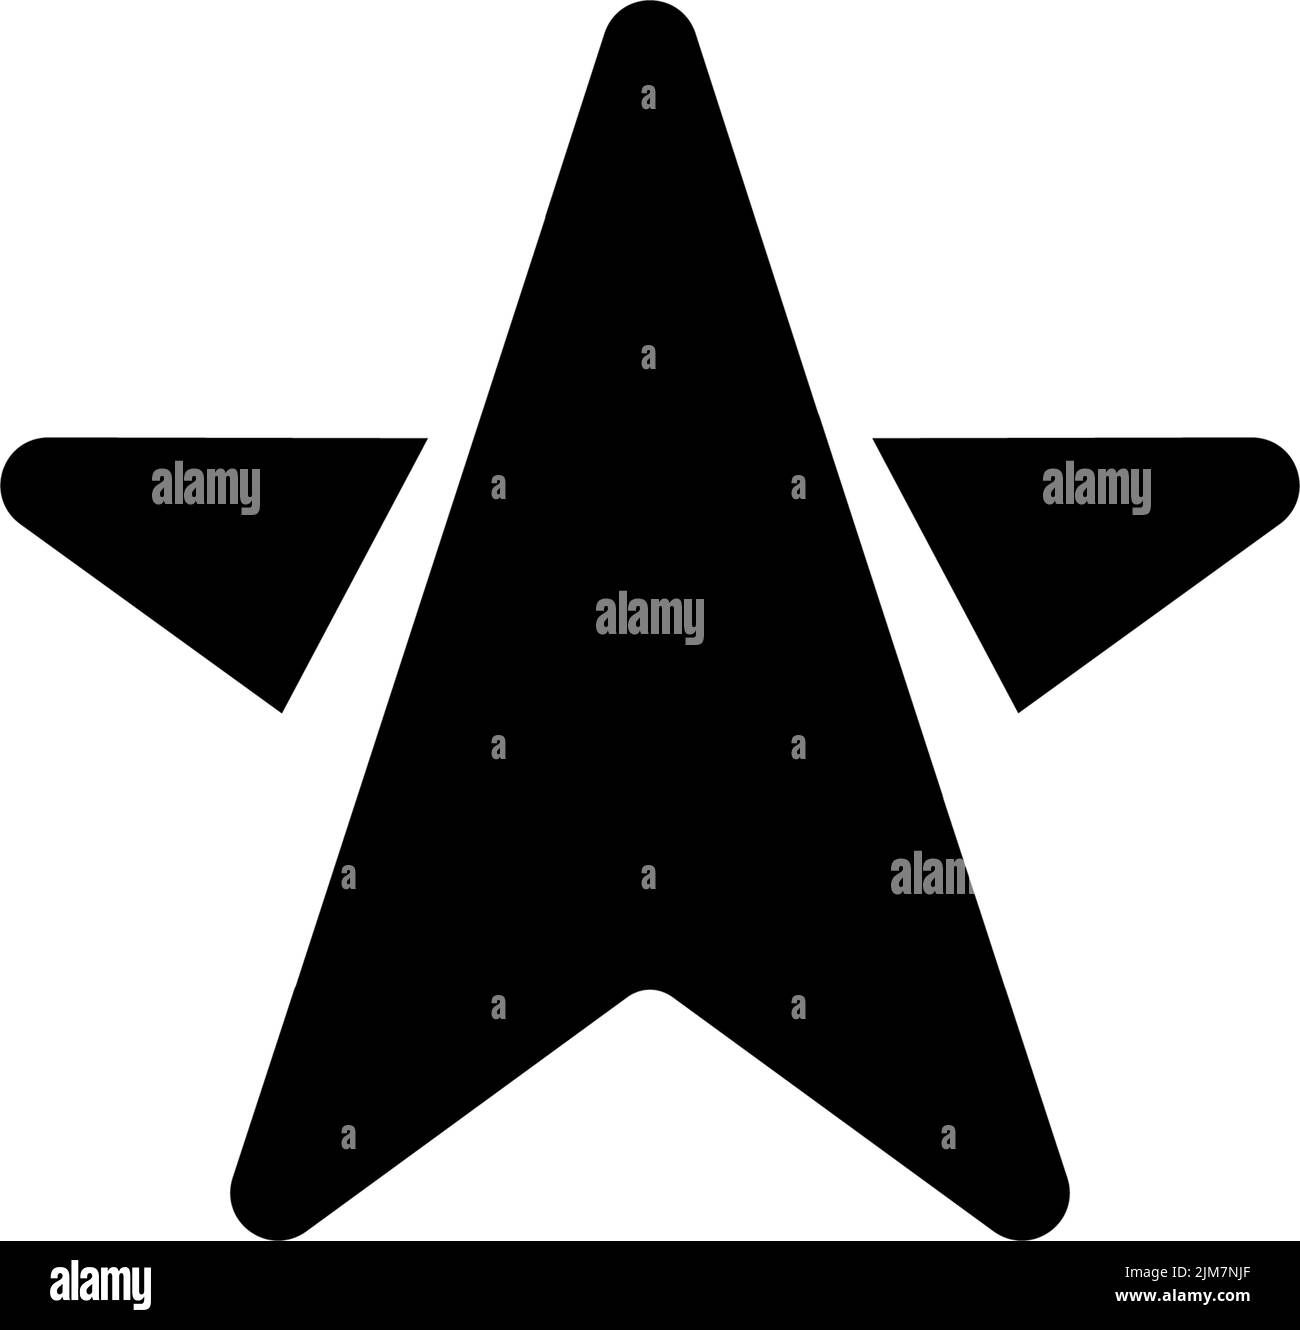 The black star sign made of triangular shapes with white background Stock Vector